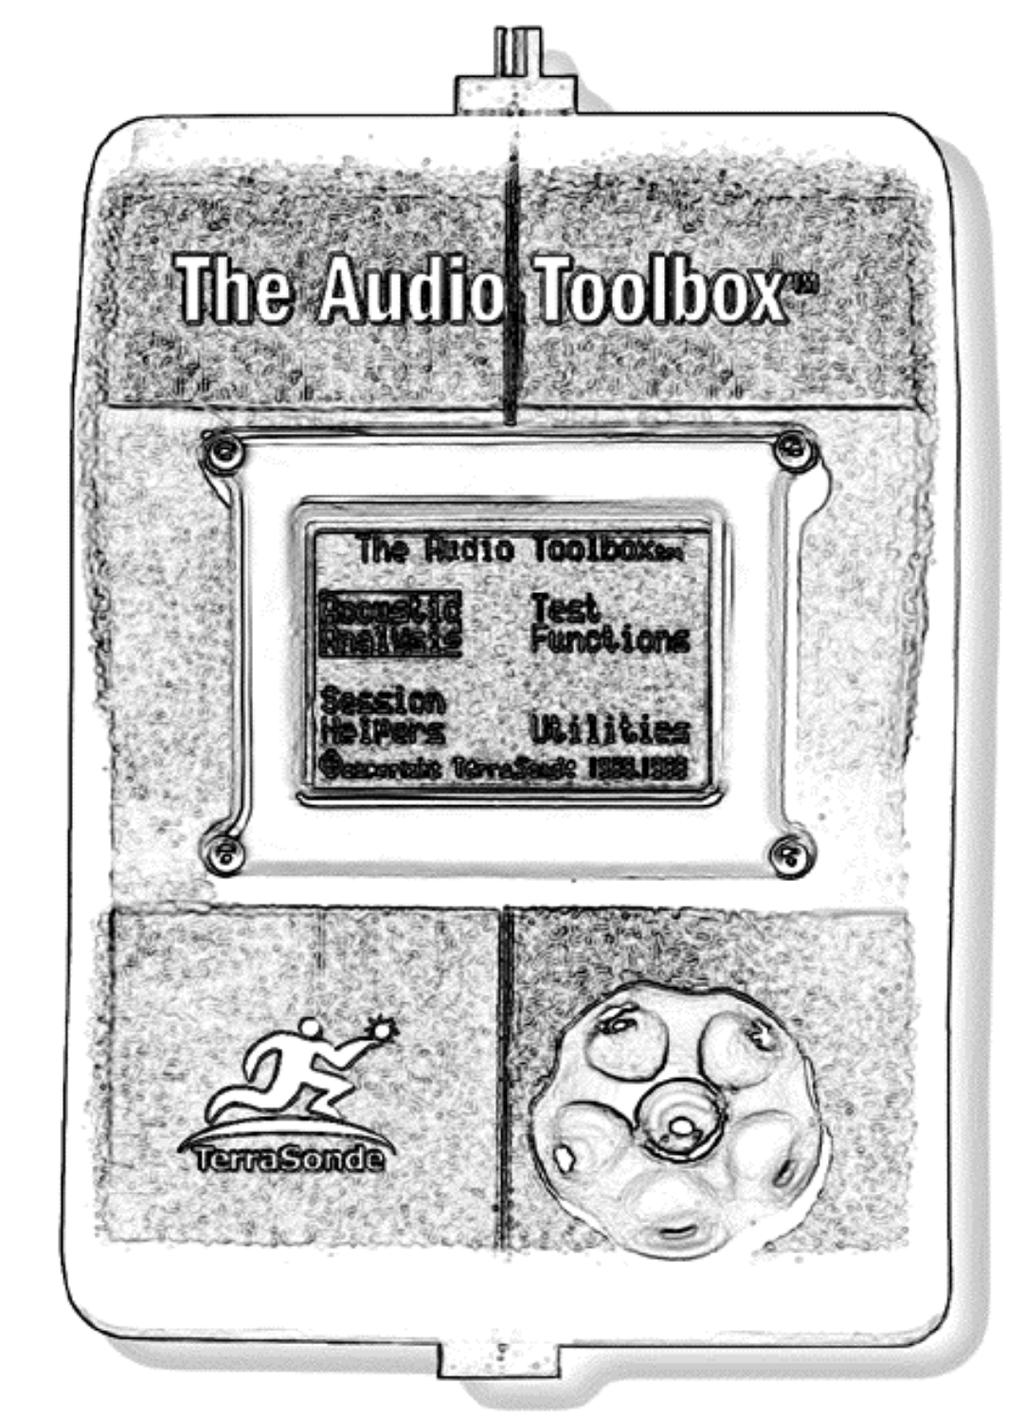 7 Operating Instructions Standard Audio Toolbox Connectors and Controls The Audio Toolbox measures 5 1/2 x 9 1/2 x 2 3/4 (14cm x 24cm x 6cm). It weighs 2 Lb. (1kg).